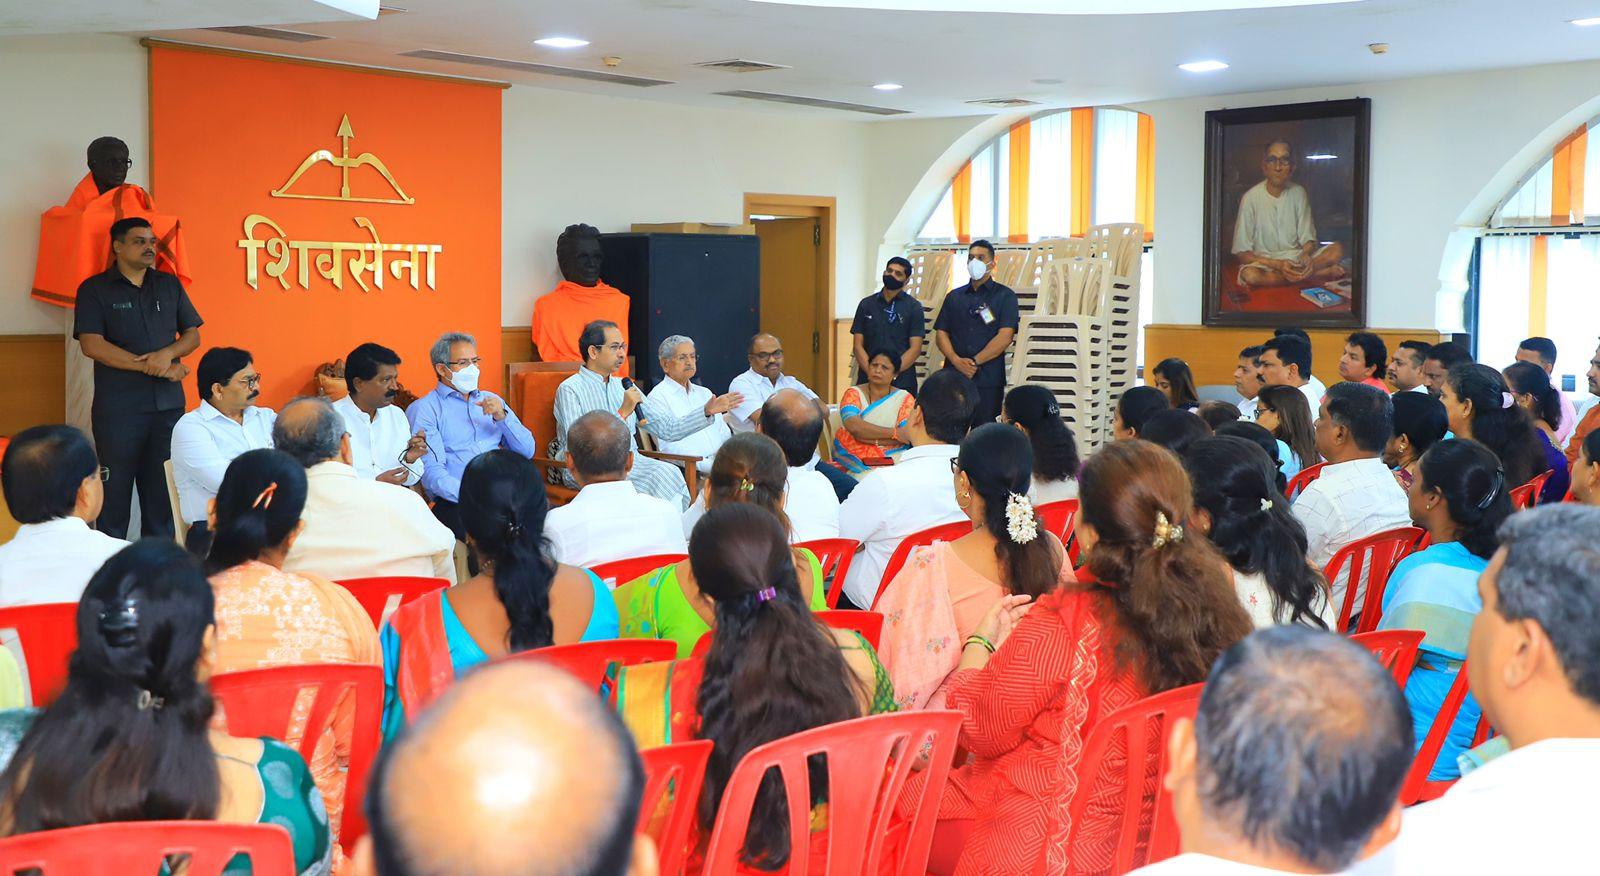 On August 8, Shiv Sena chief Uddhav Thackeray exhorted party workers to focus on increasing the membership, as this will prove crucial before the Election Commission (EC).